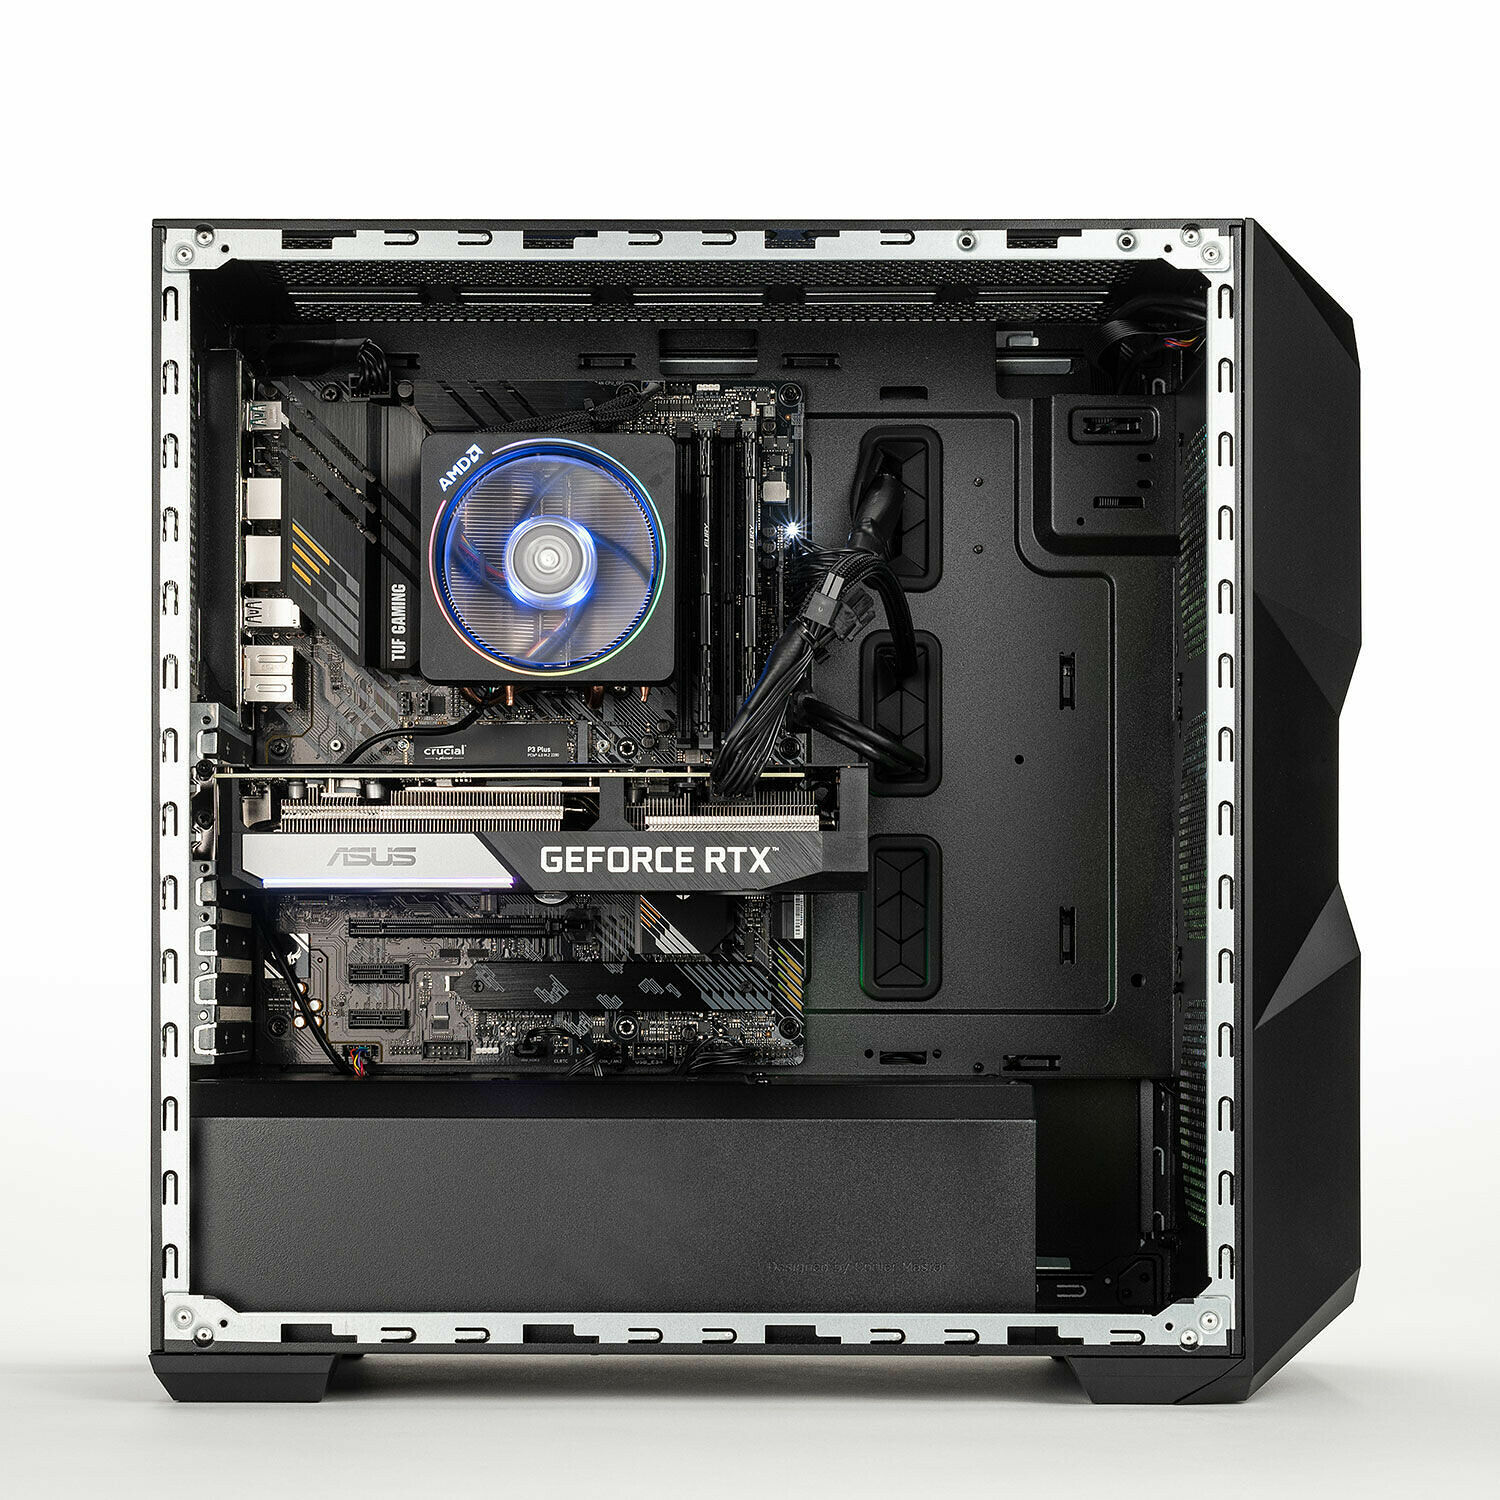 PC Gamer SILVER AMD (Sans Windows) (Powered by Asus) (image:5)